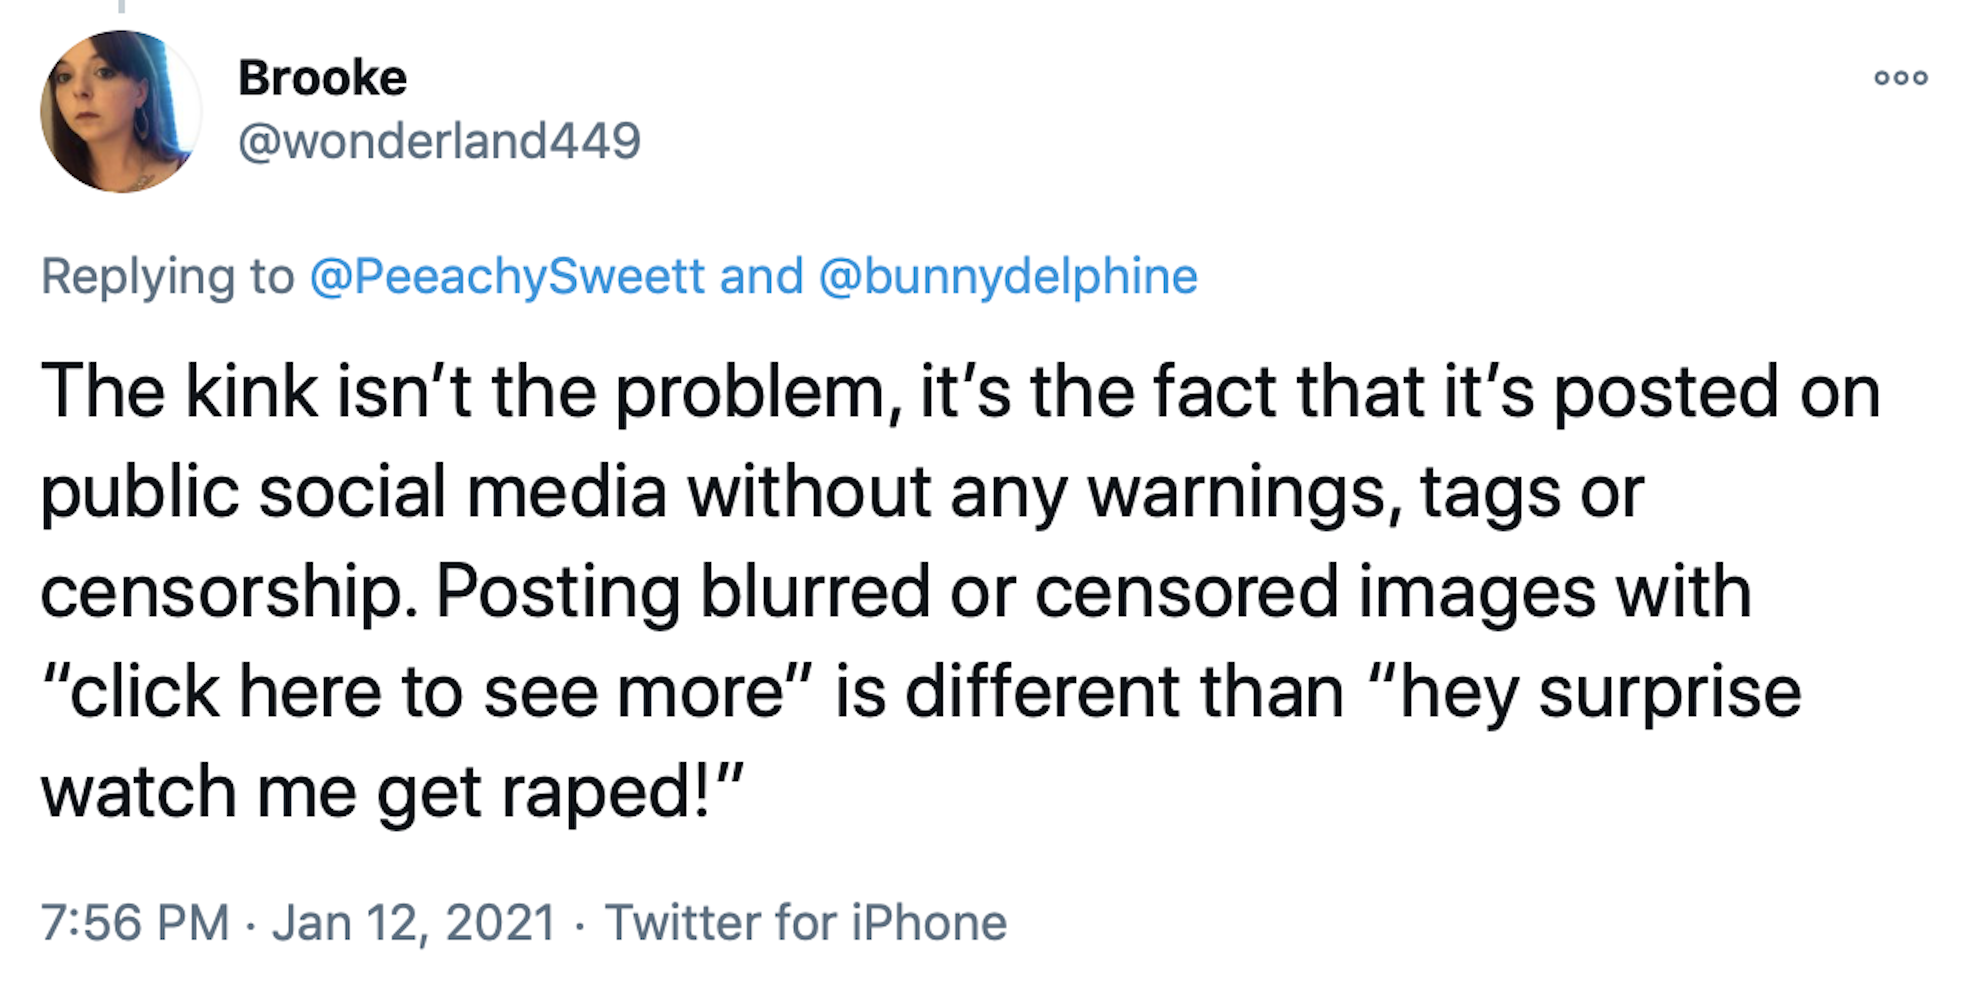 The kink isn’t the problem, it’s the fact that it’s posted on public social media without any warnings, tags or censorship. Posting blurred or censored images with “click here to see more” is different than “hey surprise watch me get raped!”